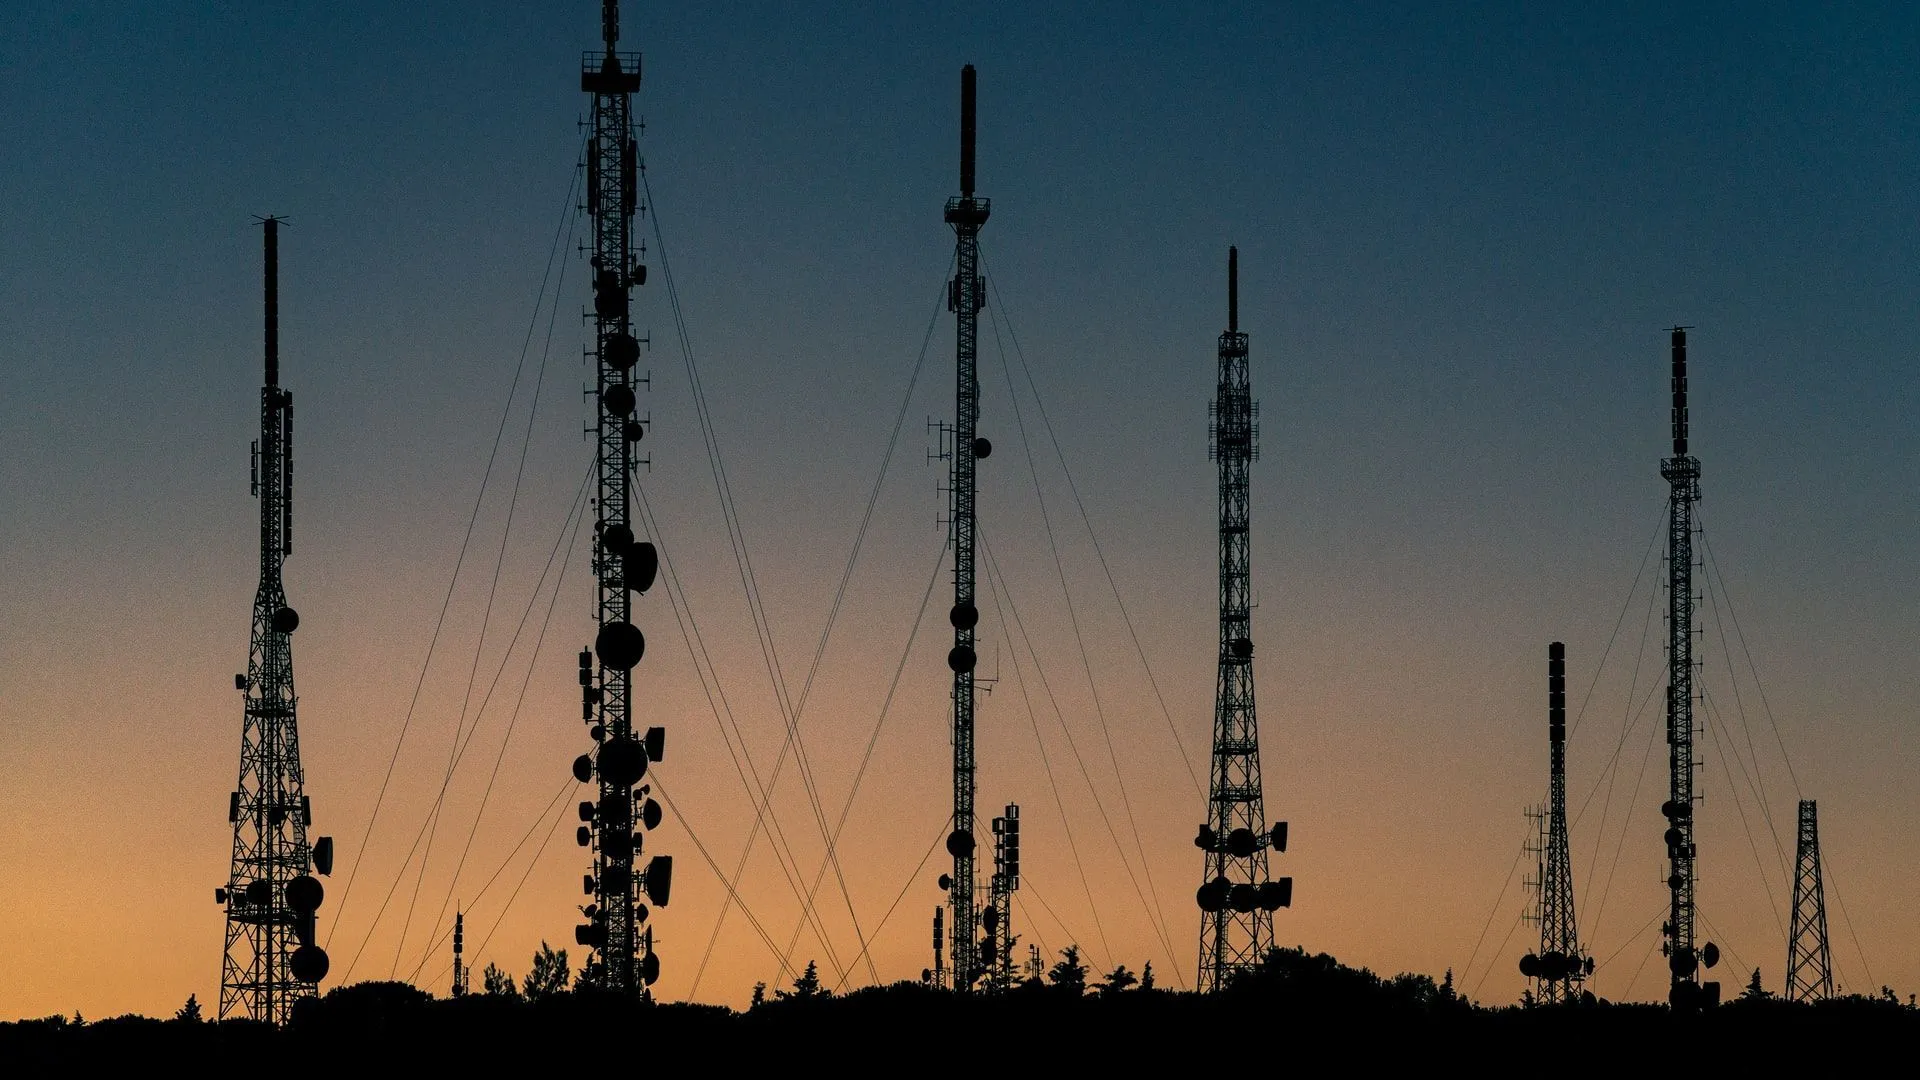 A group of radio towers in the Italian countryside.